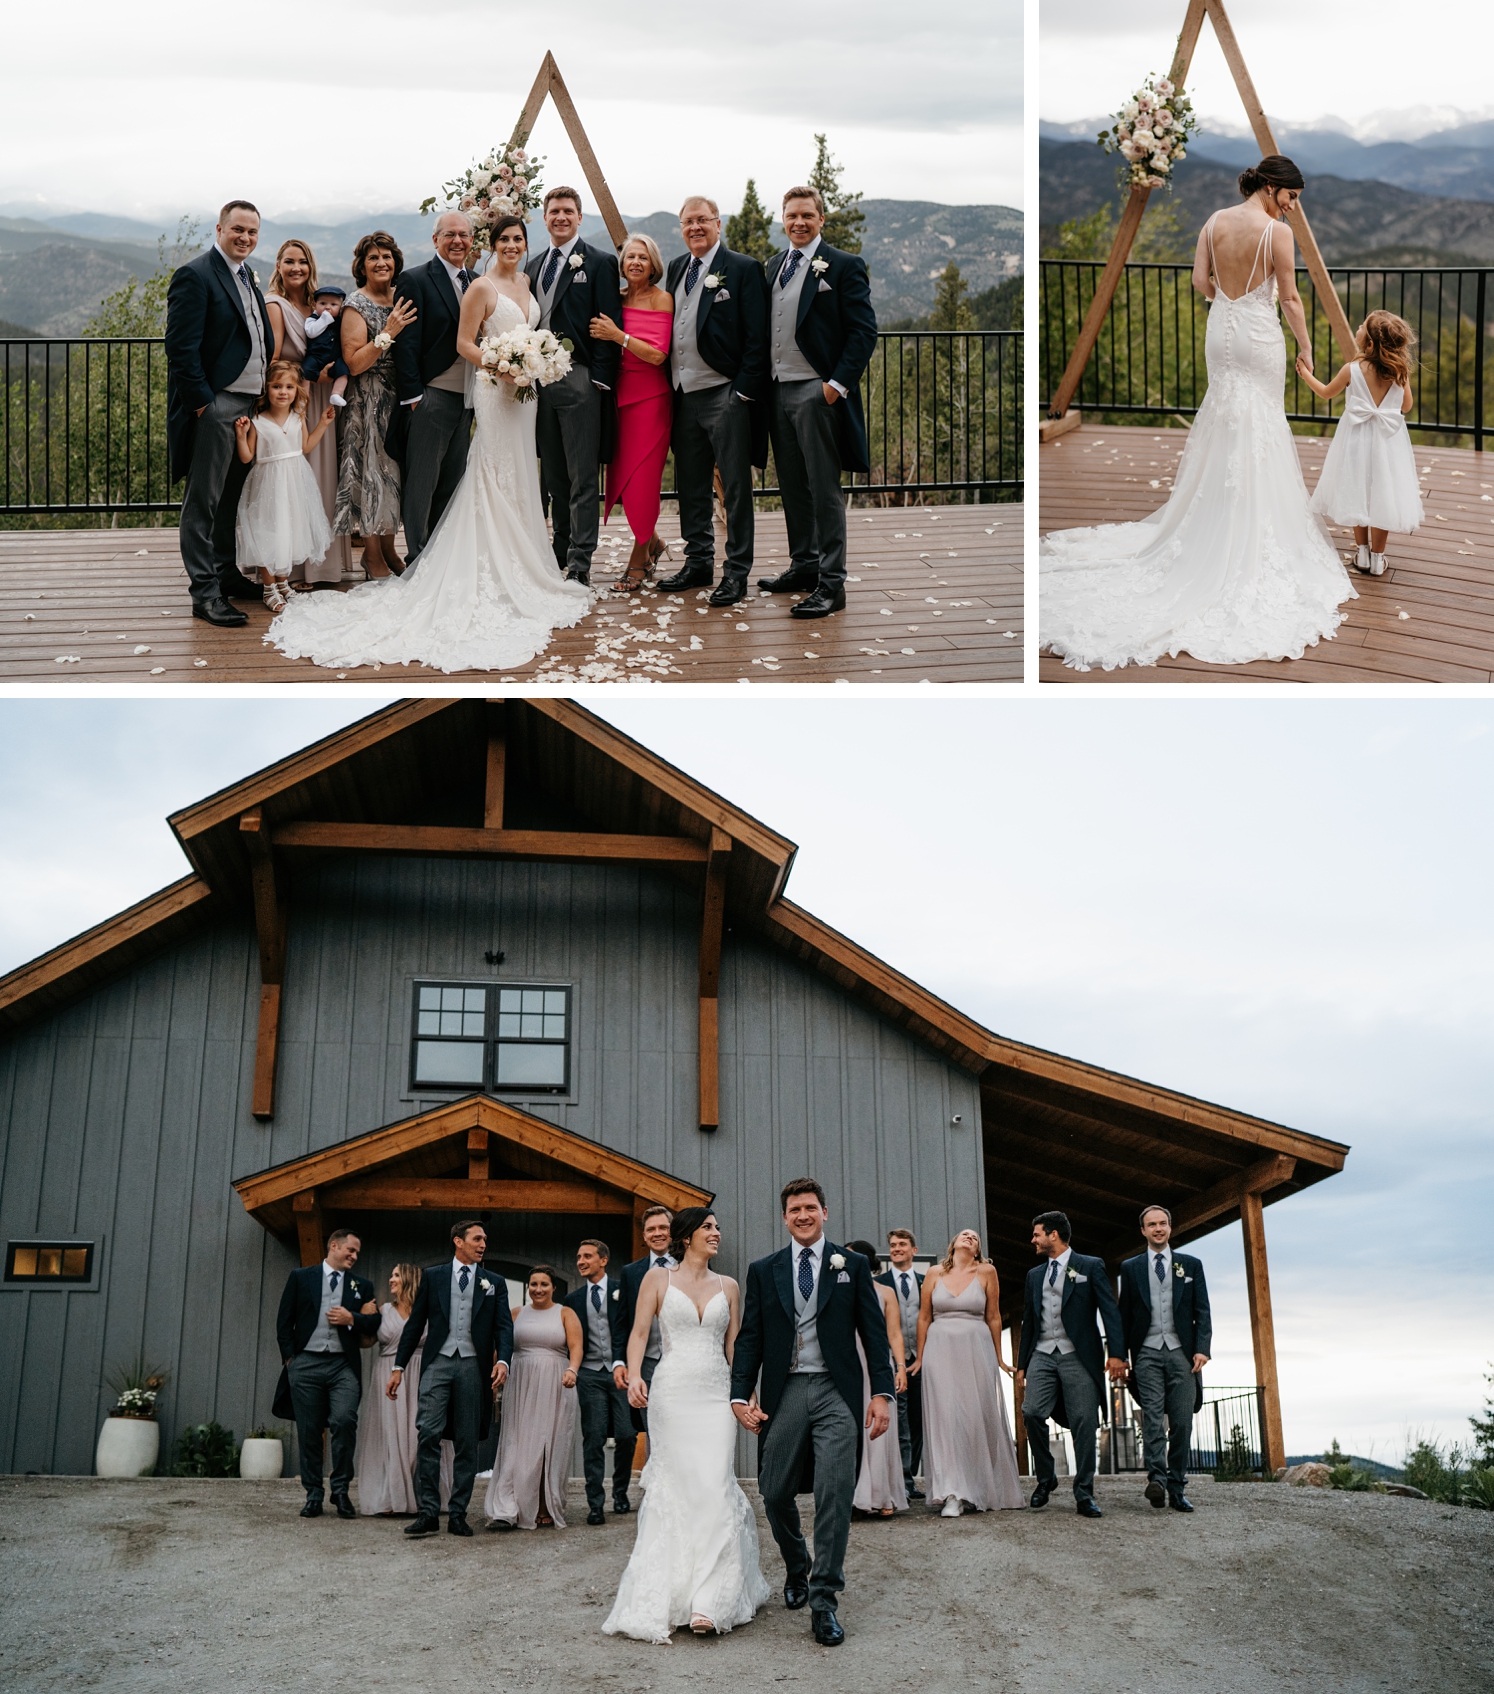 Bride and groom posing with family on ceremony deck at North Star Gatherings | bride holding hands with flower girl | Wedding party walking in front of North Star Gatherings | McArthur Weddings and Events